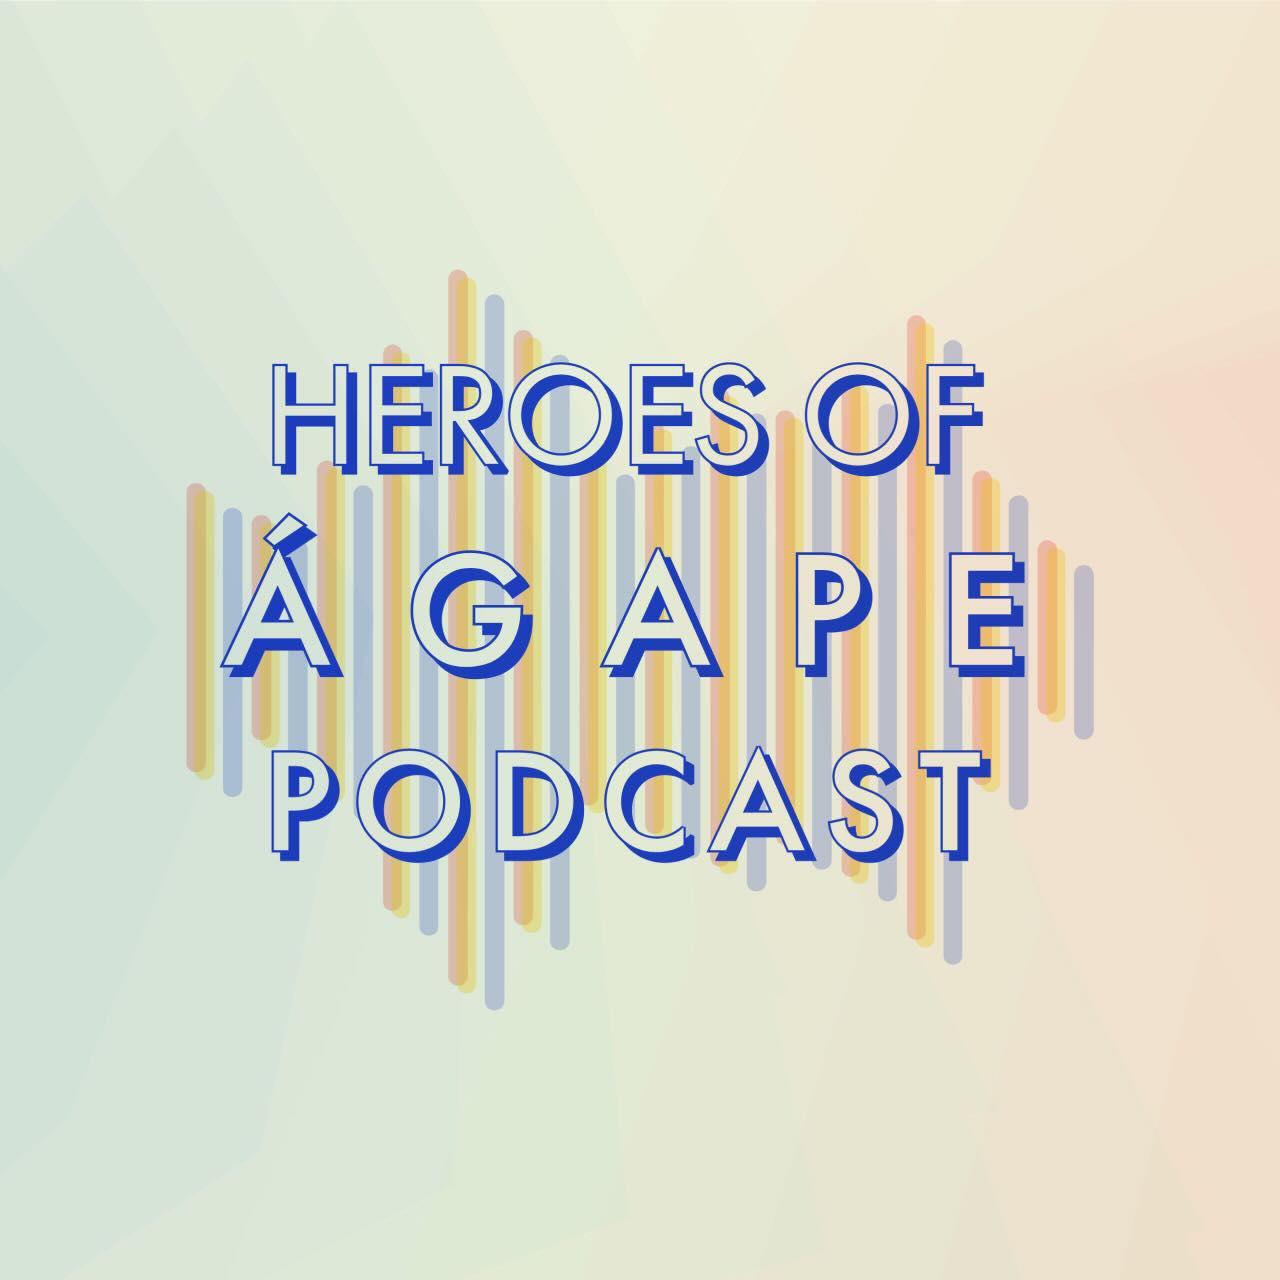 Heroes of Agape Podcast